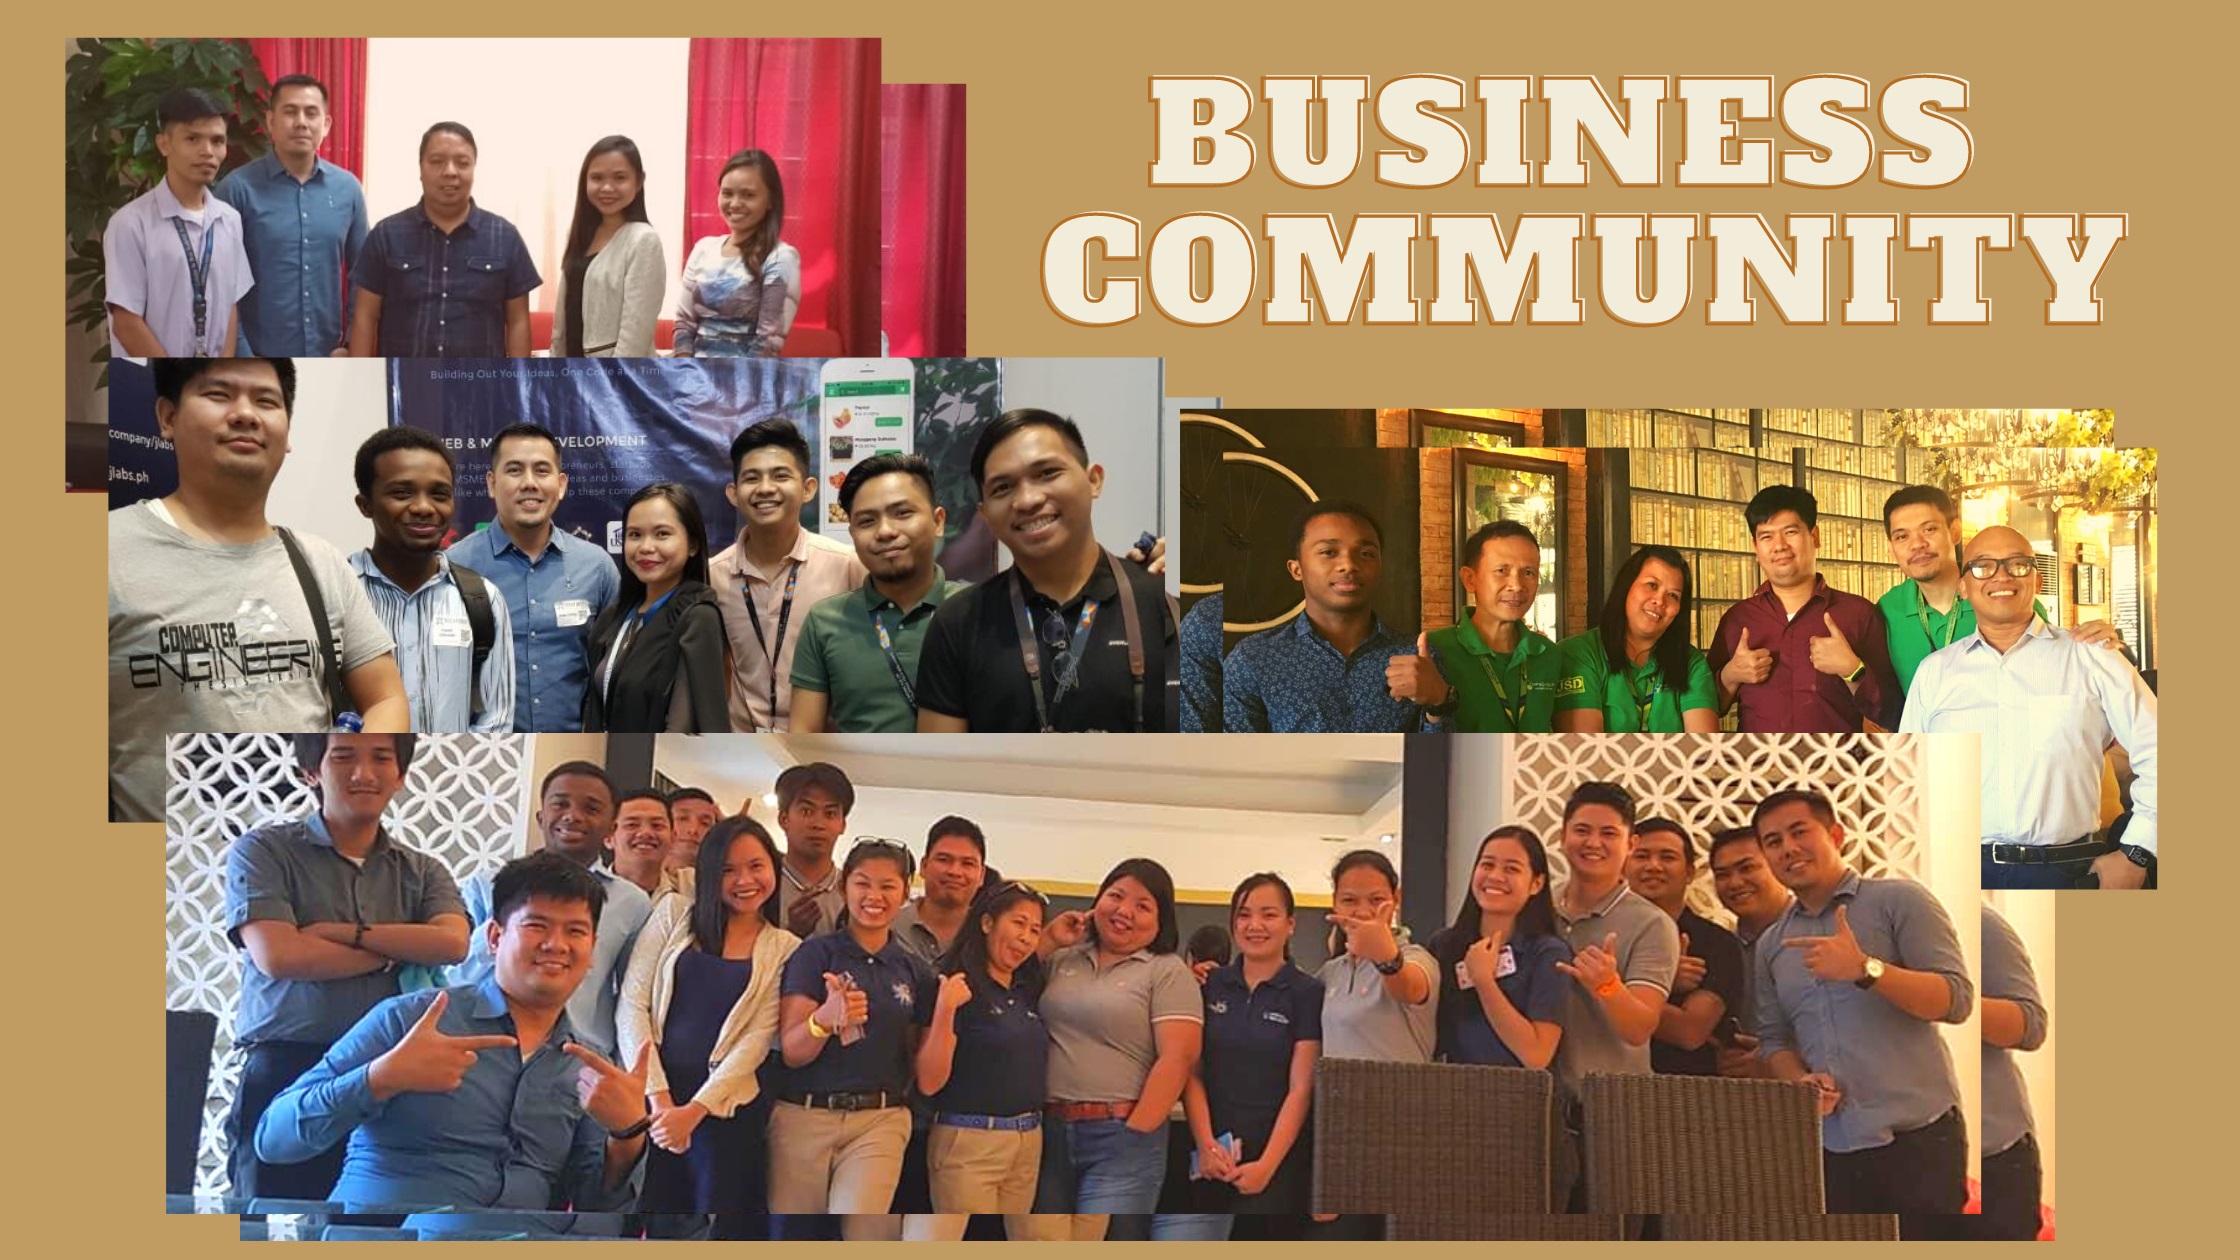 Our Business Community